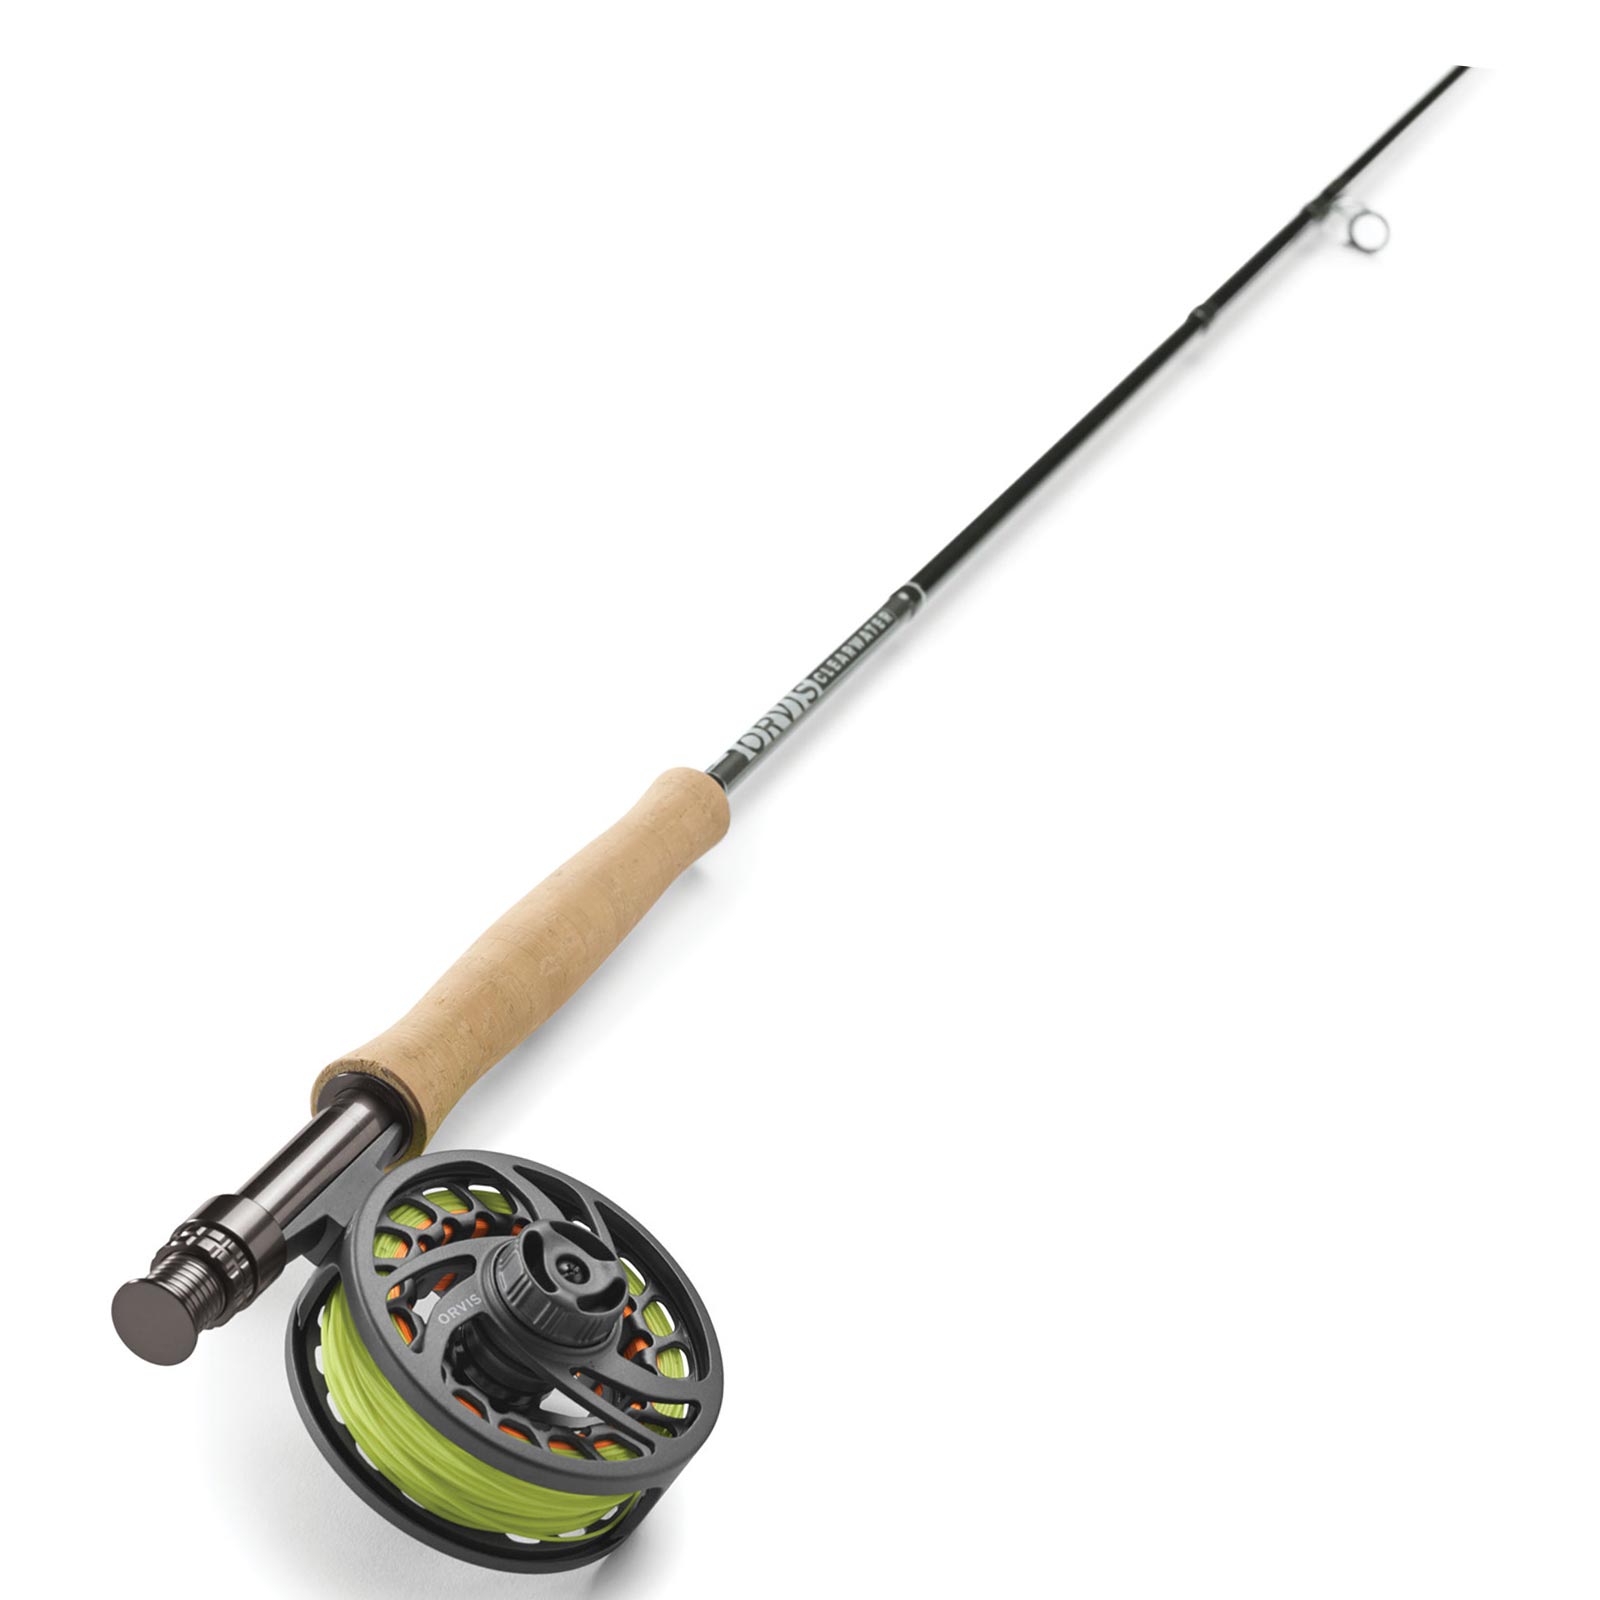 Shop Orvis Fly Lines: Clearwater, Pro, and More